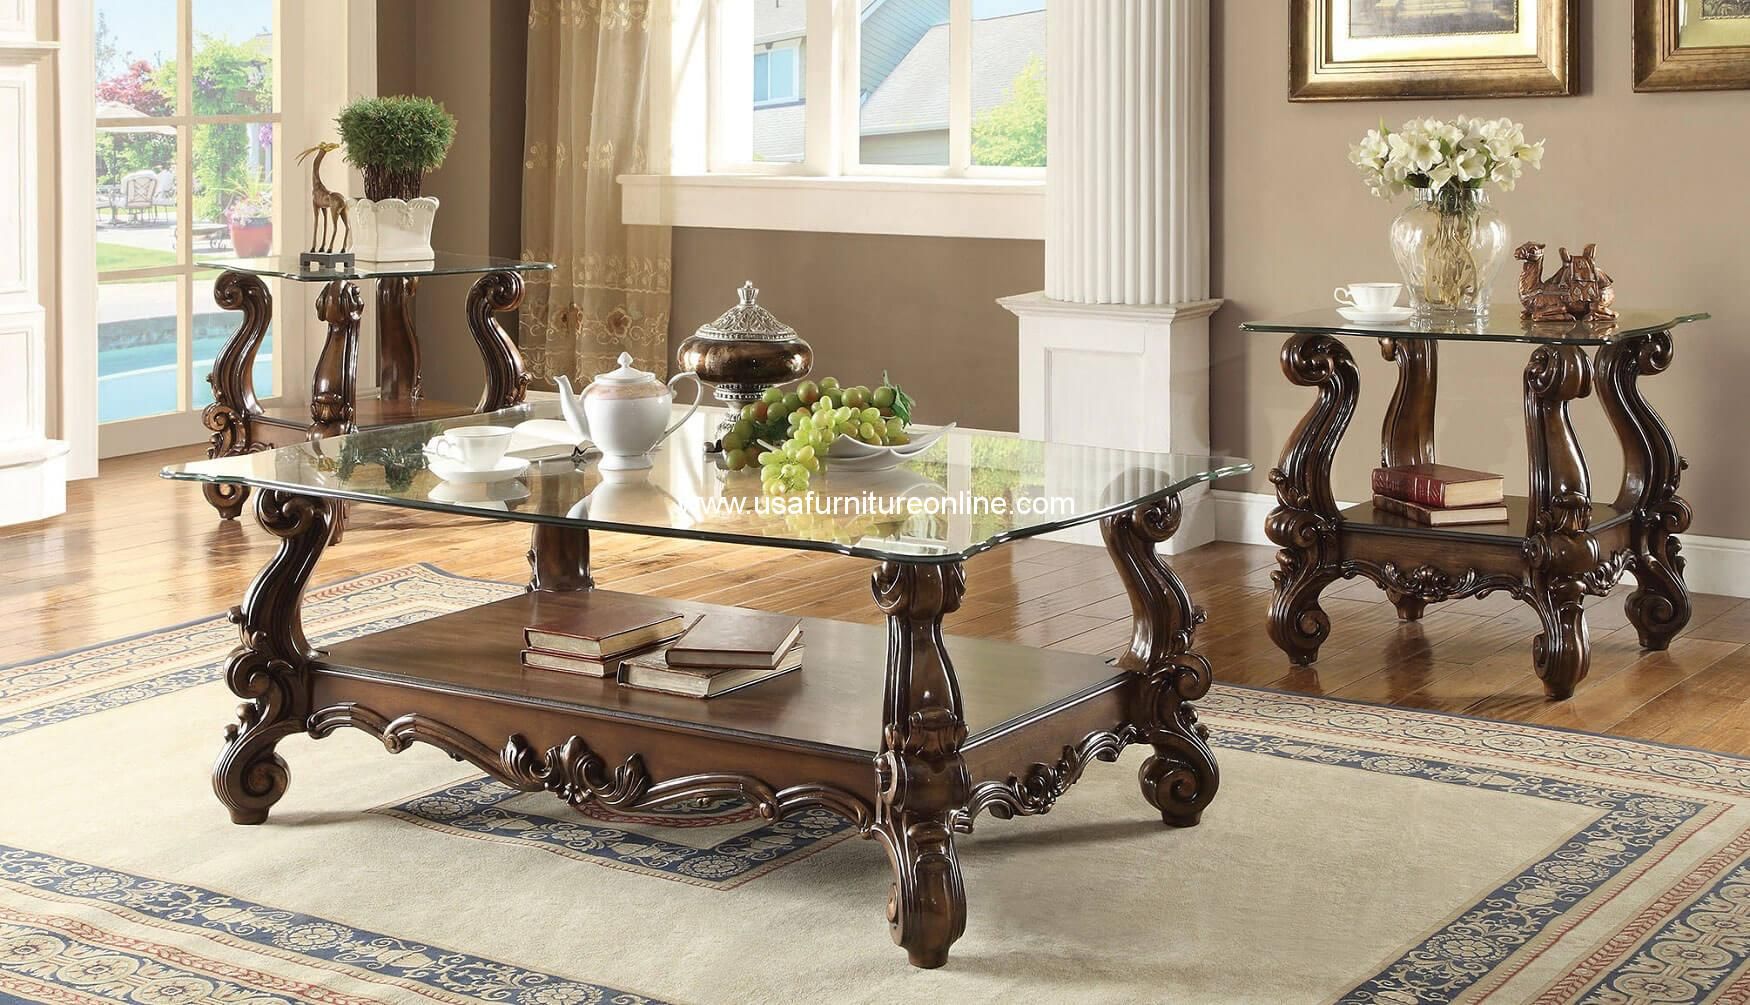 3 Piece Acme Versailles Glass Top Coffee Table Set Cherry Oak Finish Throughout Espresso Wood And Glass Top Console Tables (View 13 of 20)